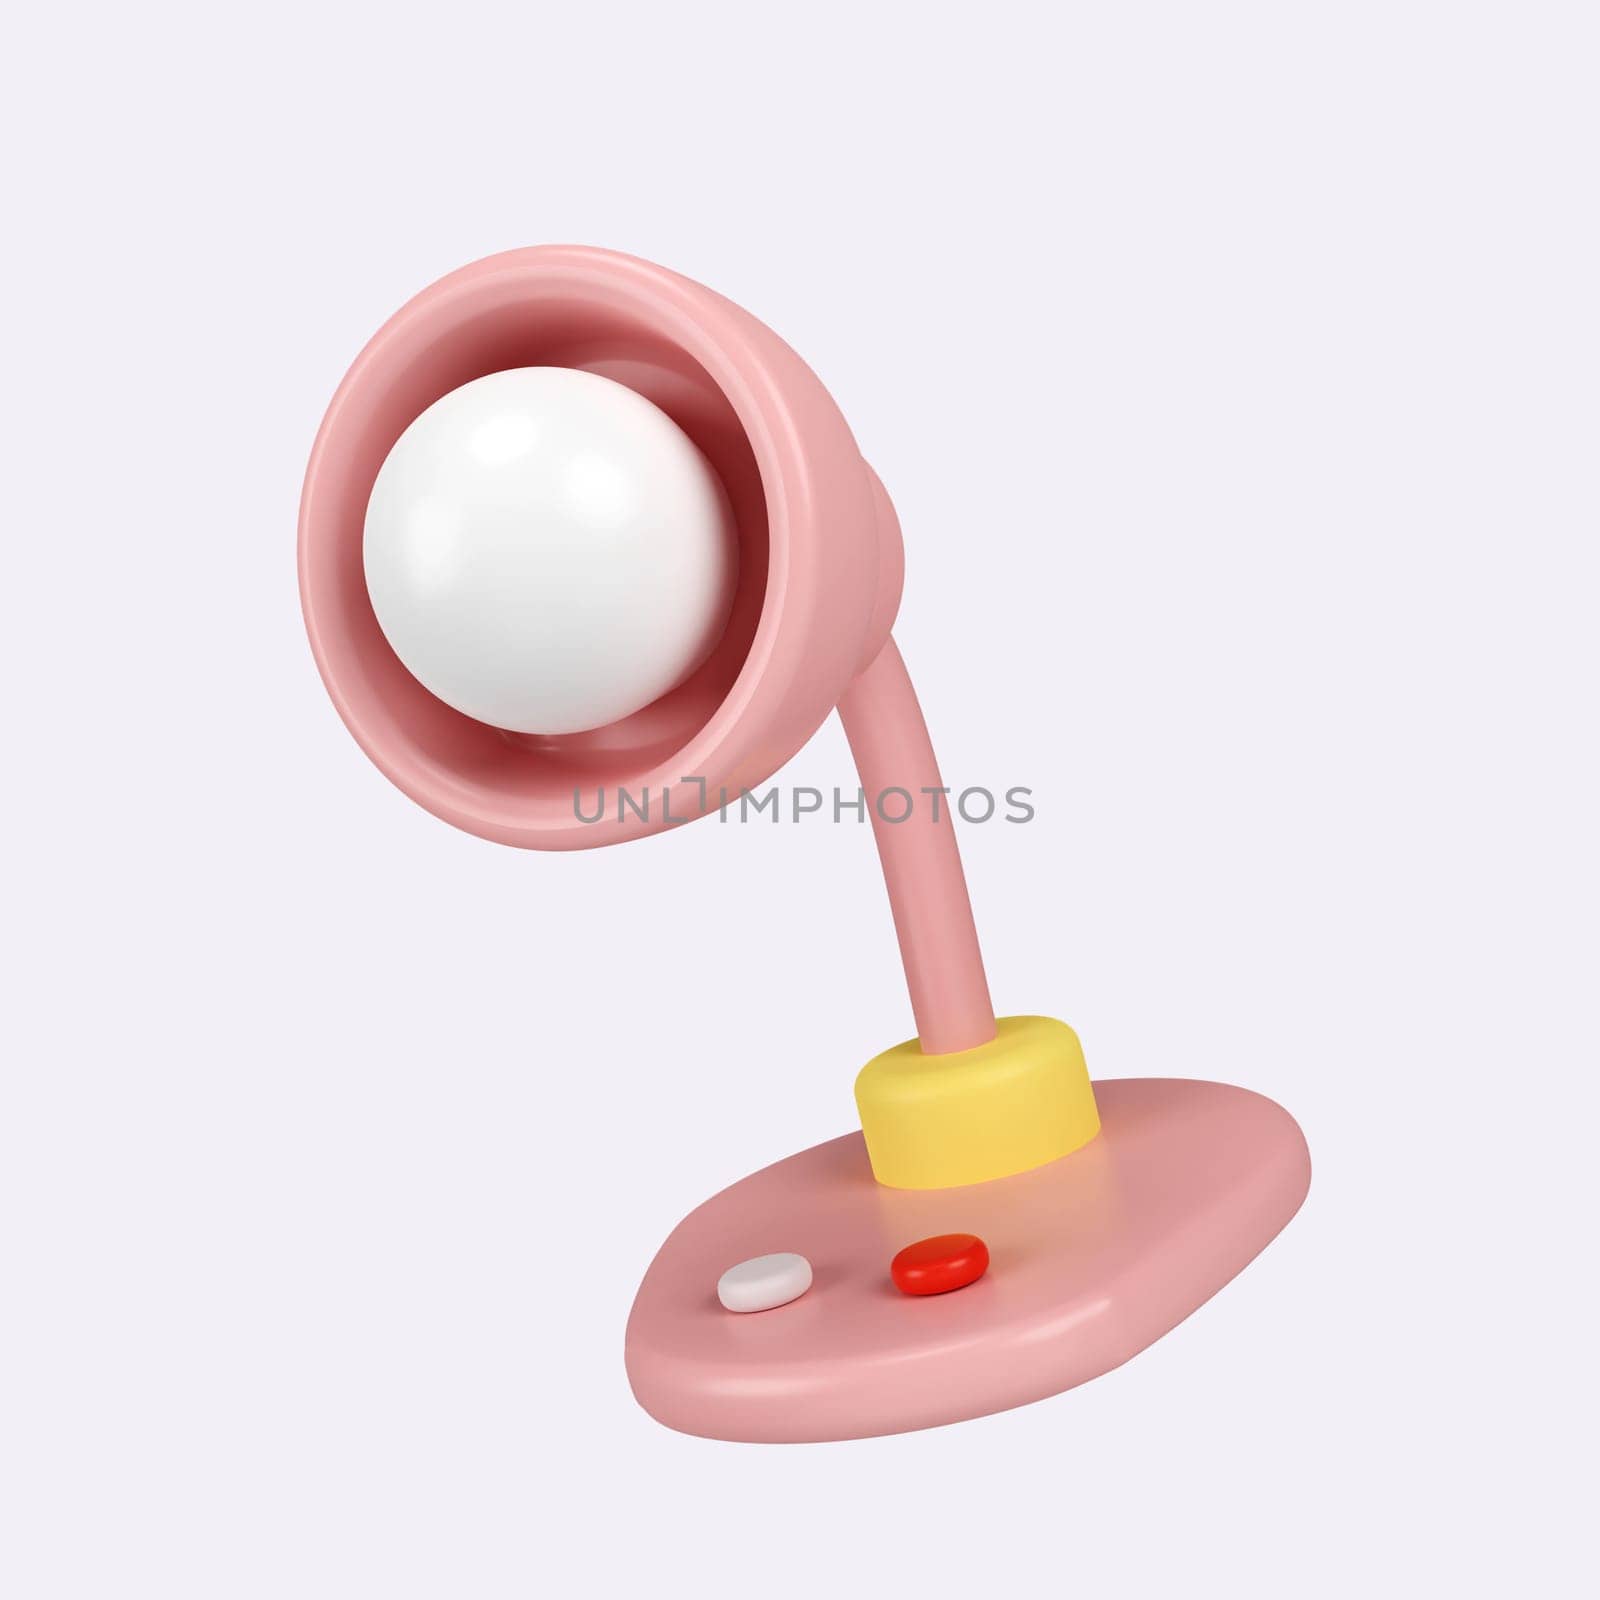 3d lamp. Back to school and education concept. isolated on background, icon symbol clipping path. 3d render illustration by meepiangraphic